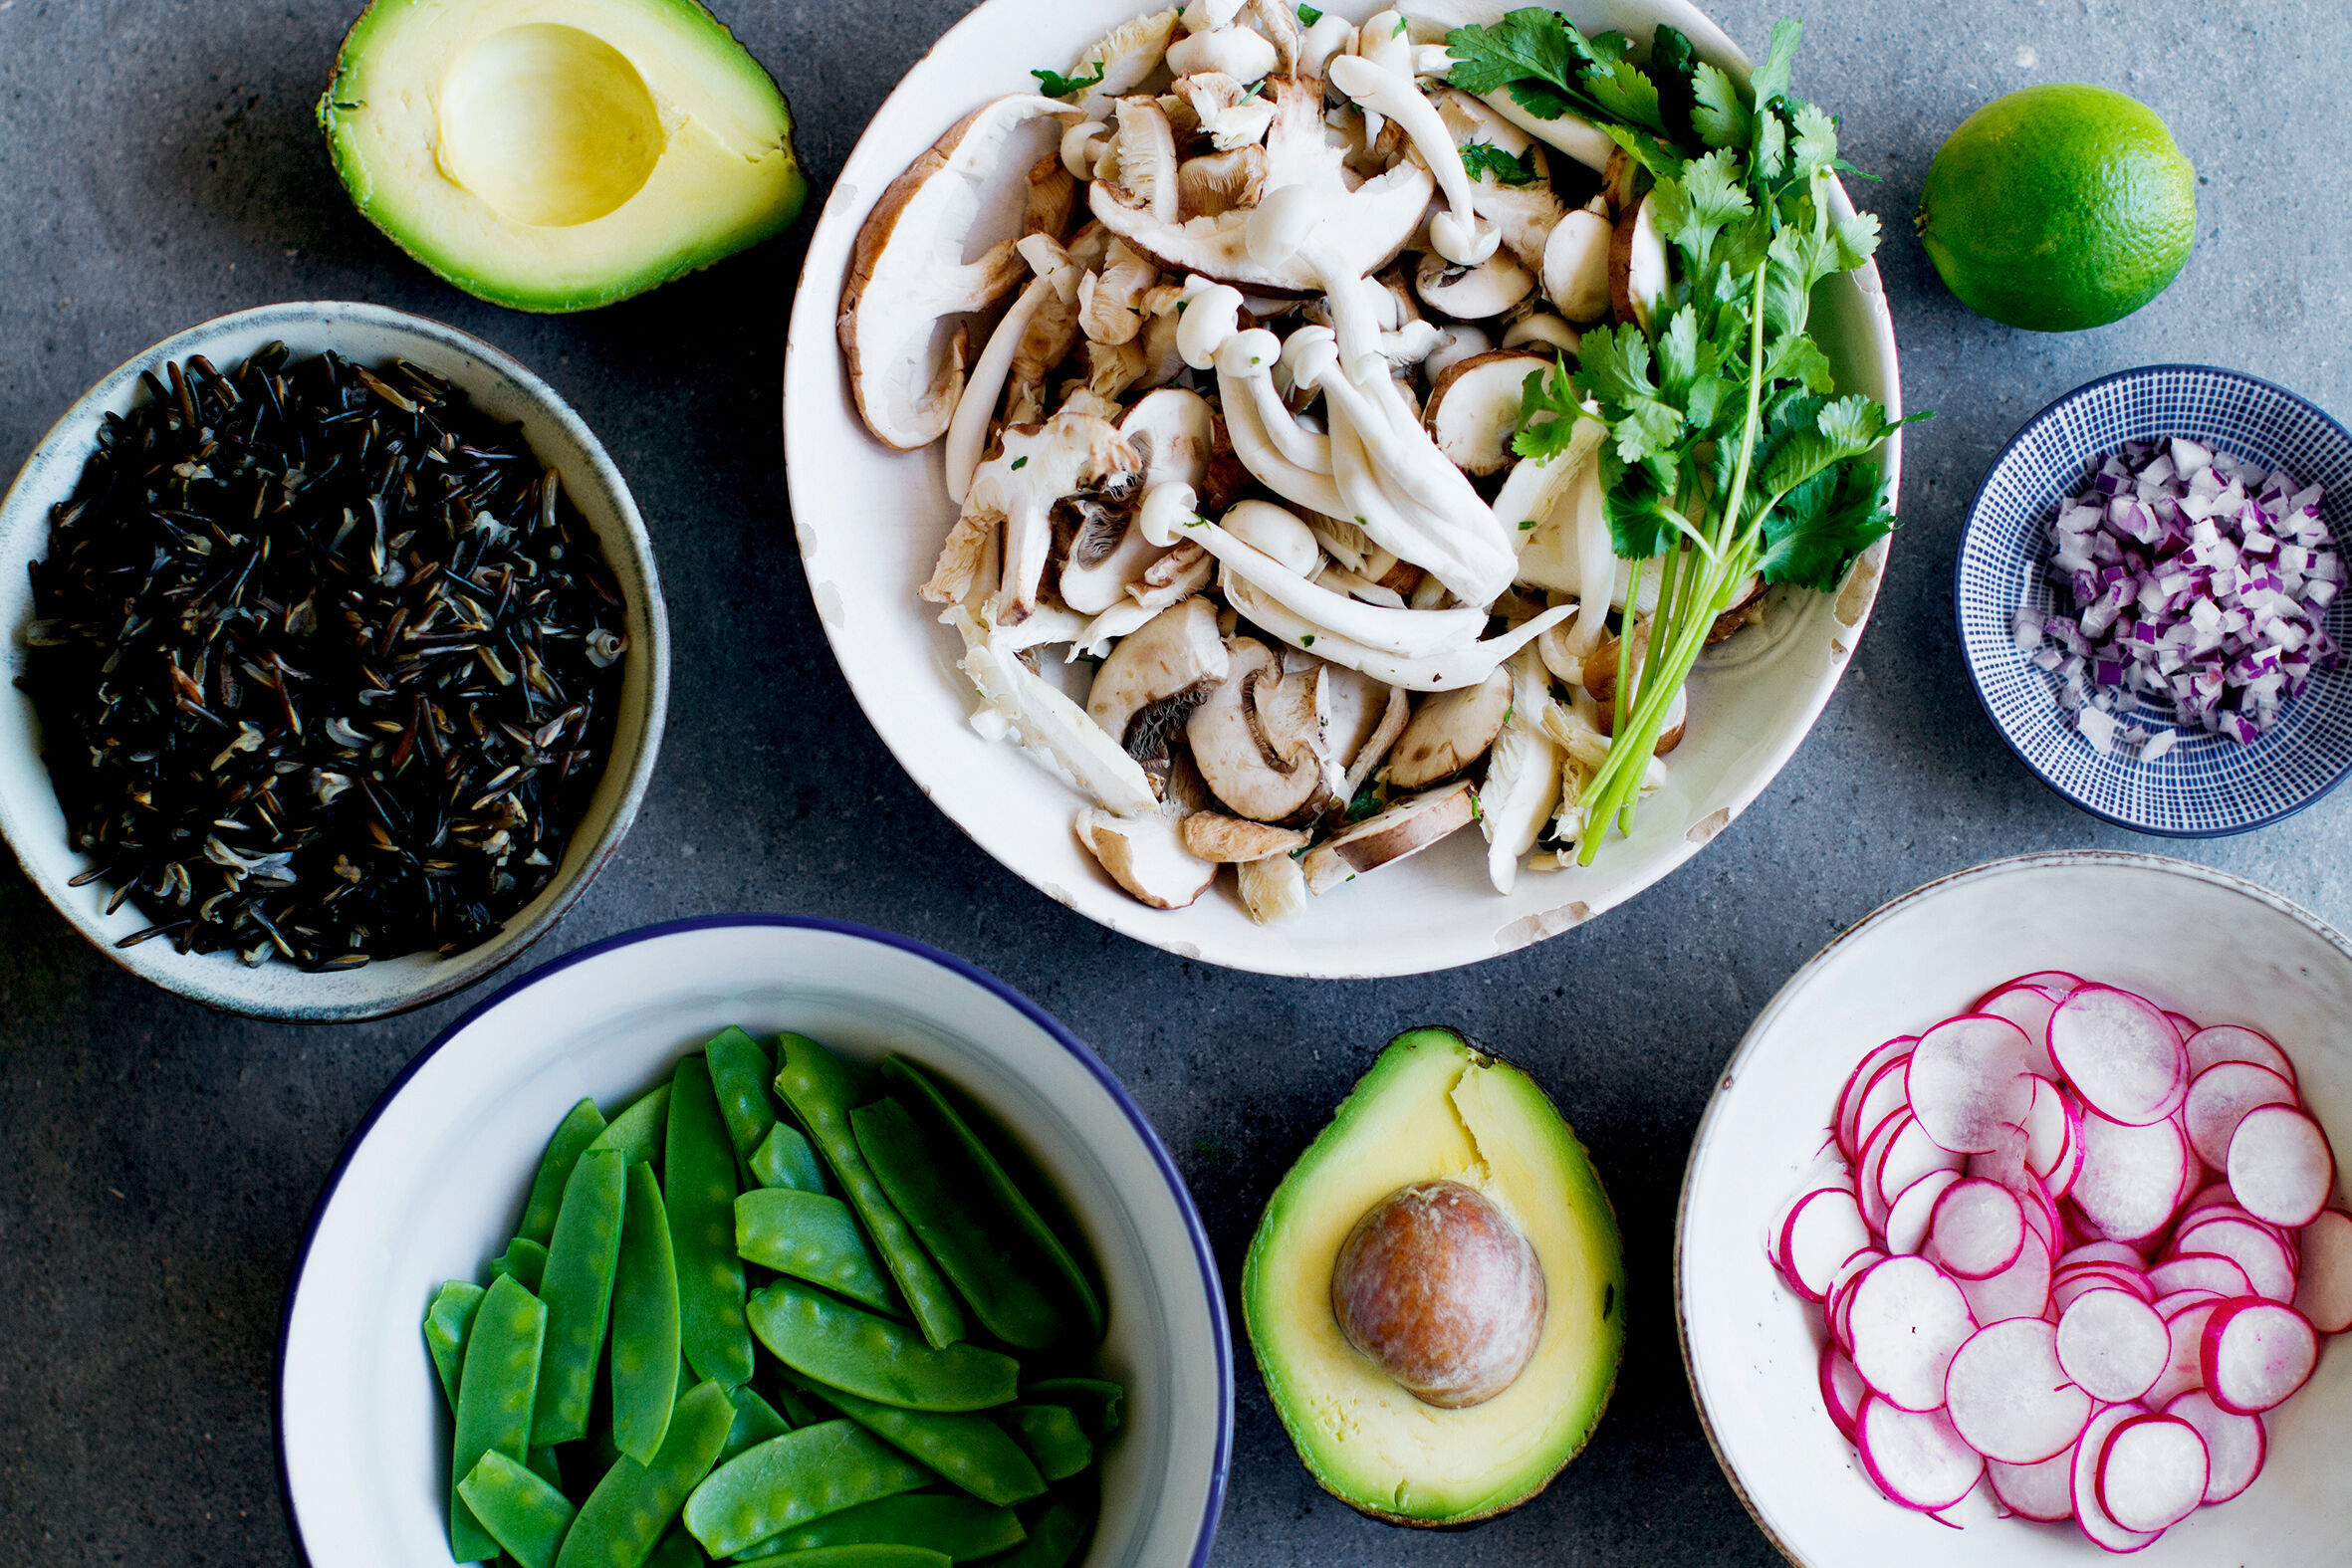 Energise yourself after yoga with these delicious yogi bowls